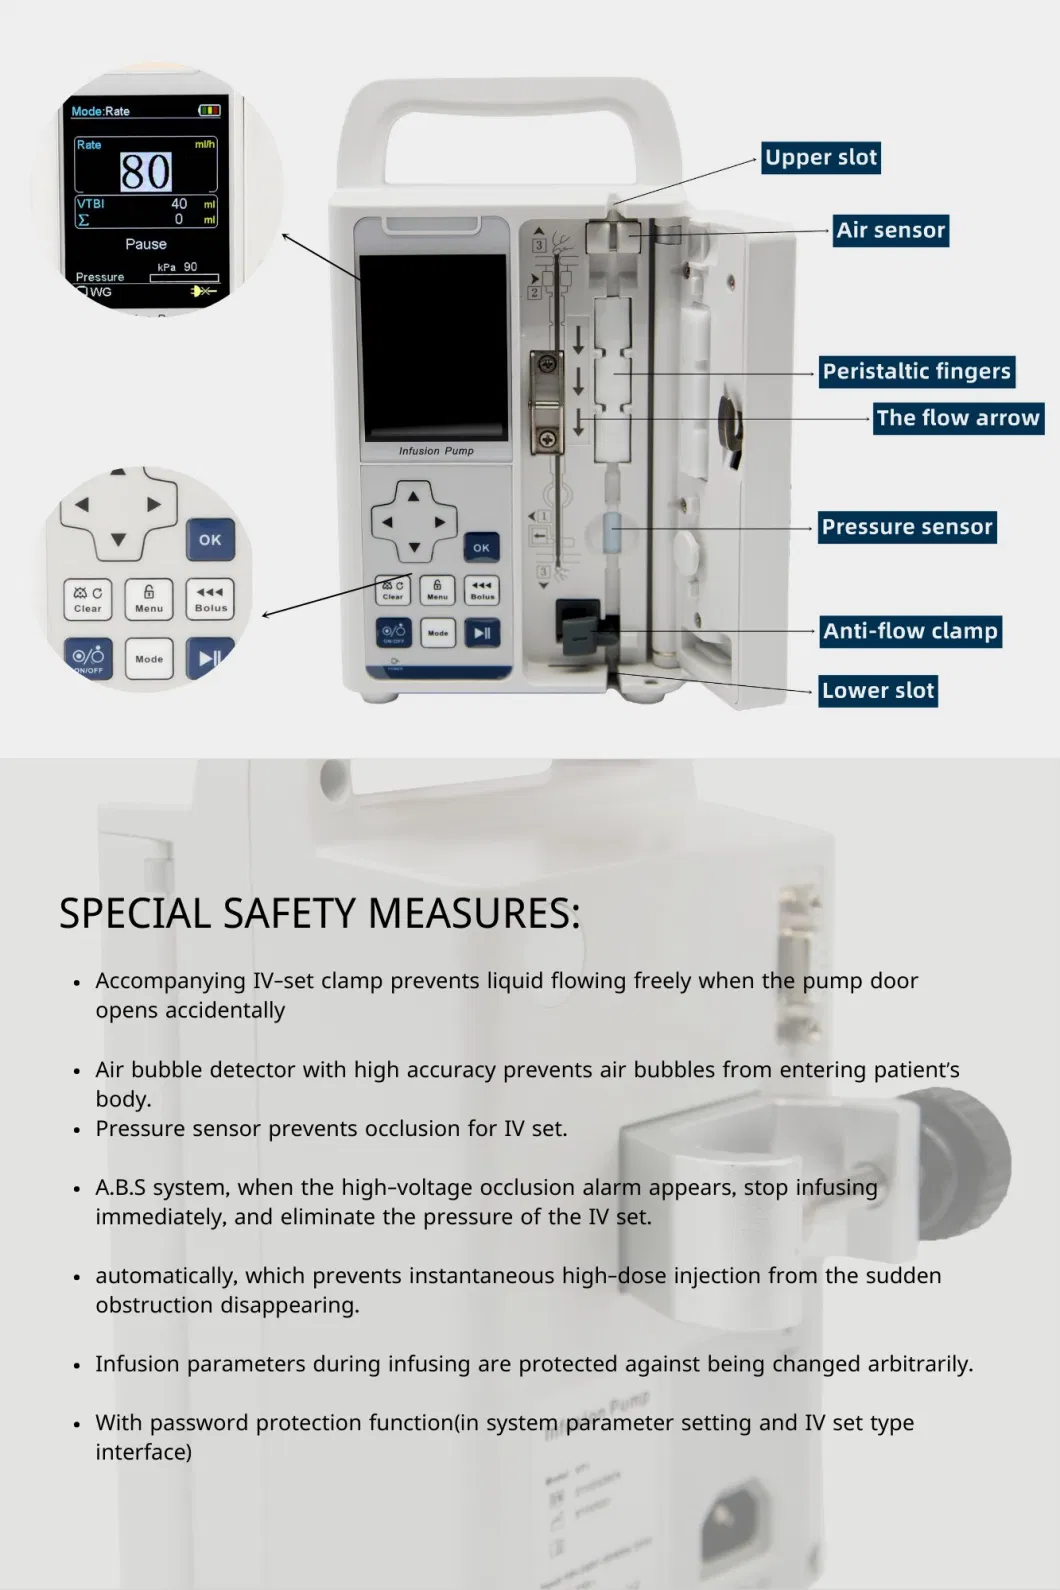 Dpmmed Medical CE Infusion Pump Manufacturer Micro Automatic Volumetric Intravenous Infusion Pump